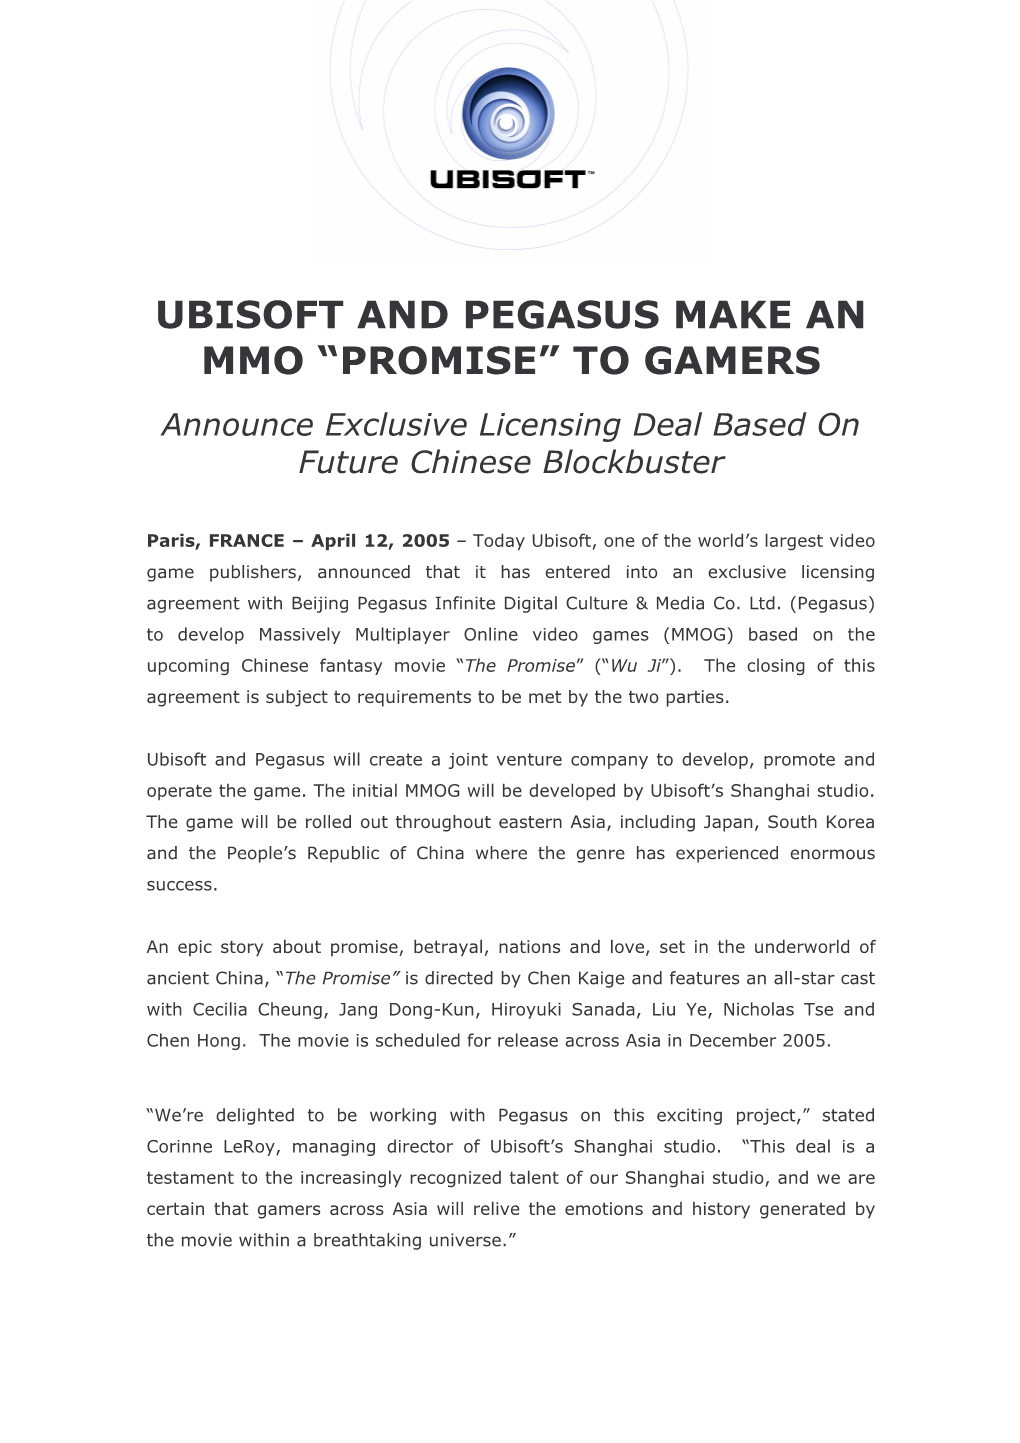 Ubisoft and Pegasus Make an Mmo —Promise“ to Gamers